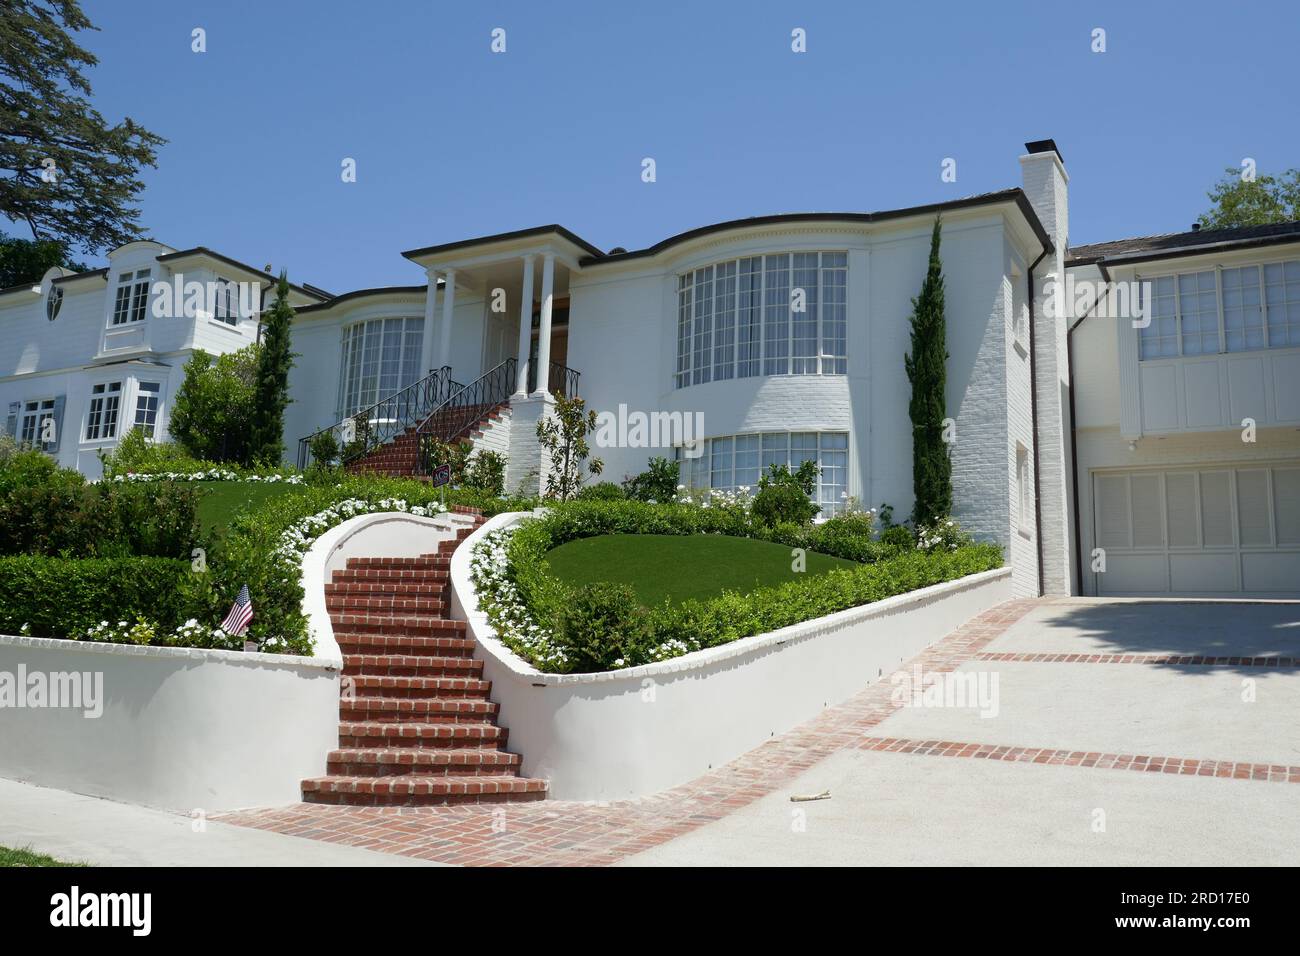 Los Angeles, California, USA 16th July 2023 Composer John Williams Home/house on July 16, 2023 in Los Angeles, California, USA. Photo by Barry King/Alamy Stock Photo Stock Photo